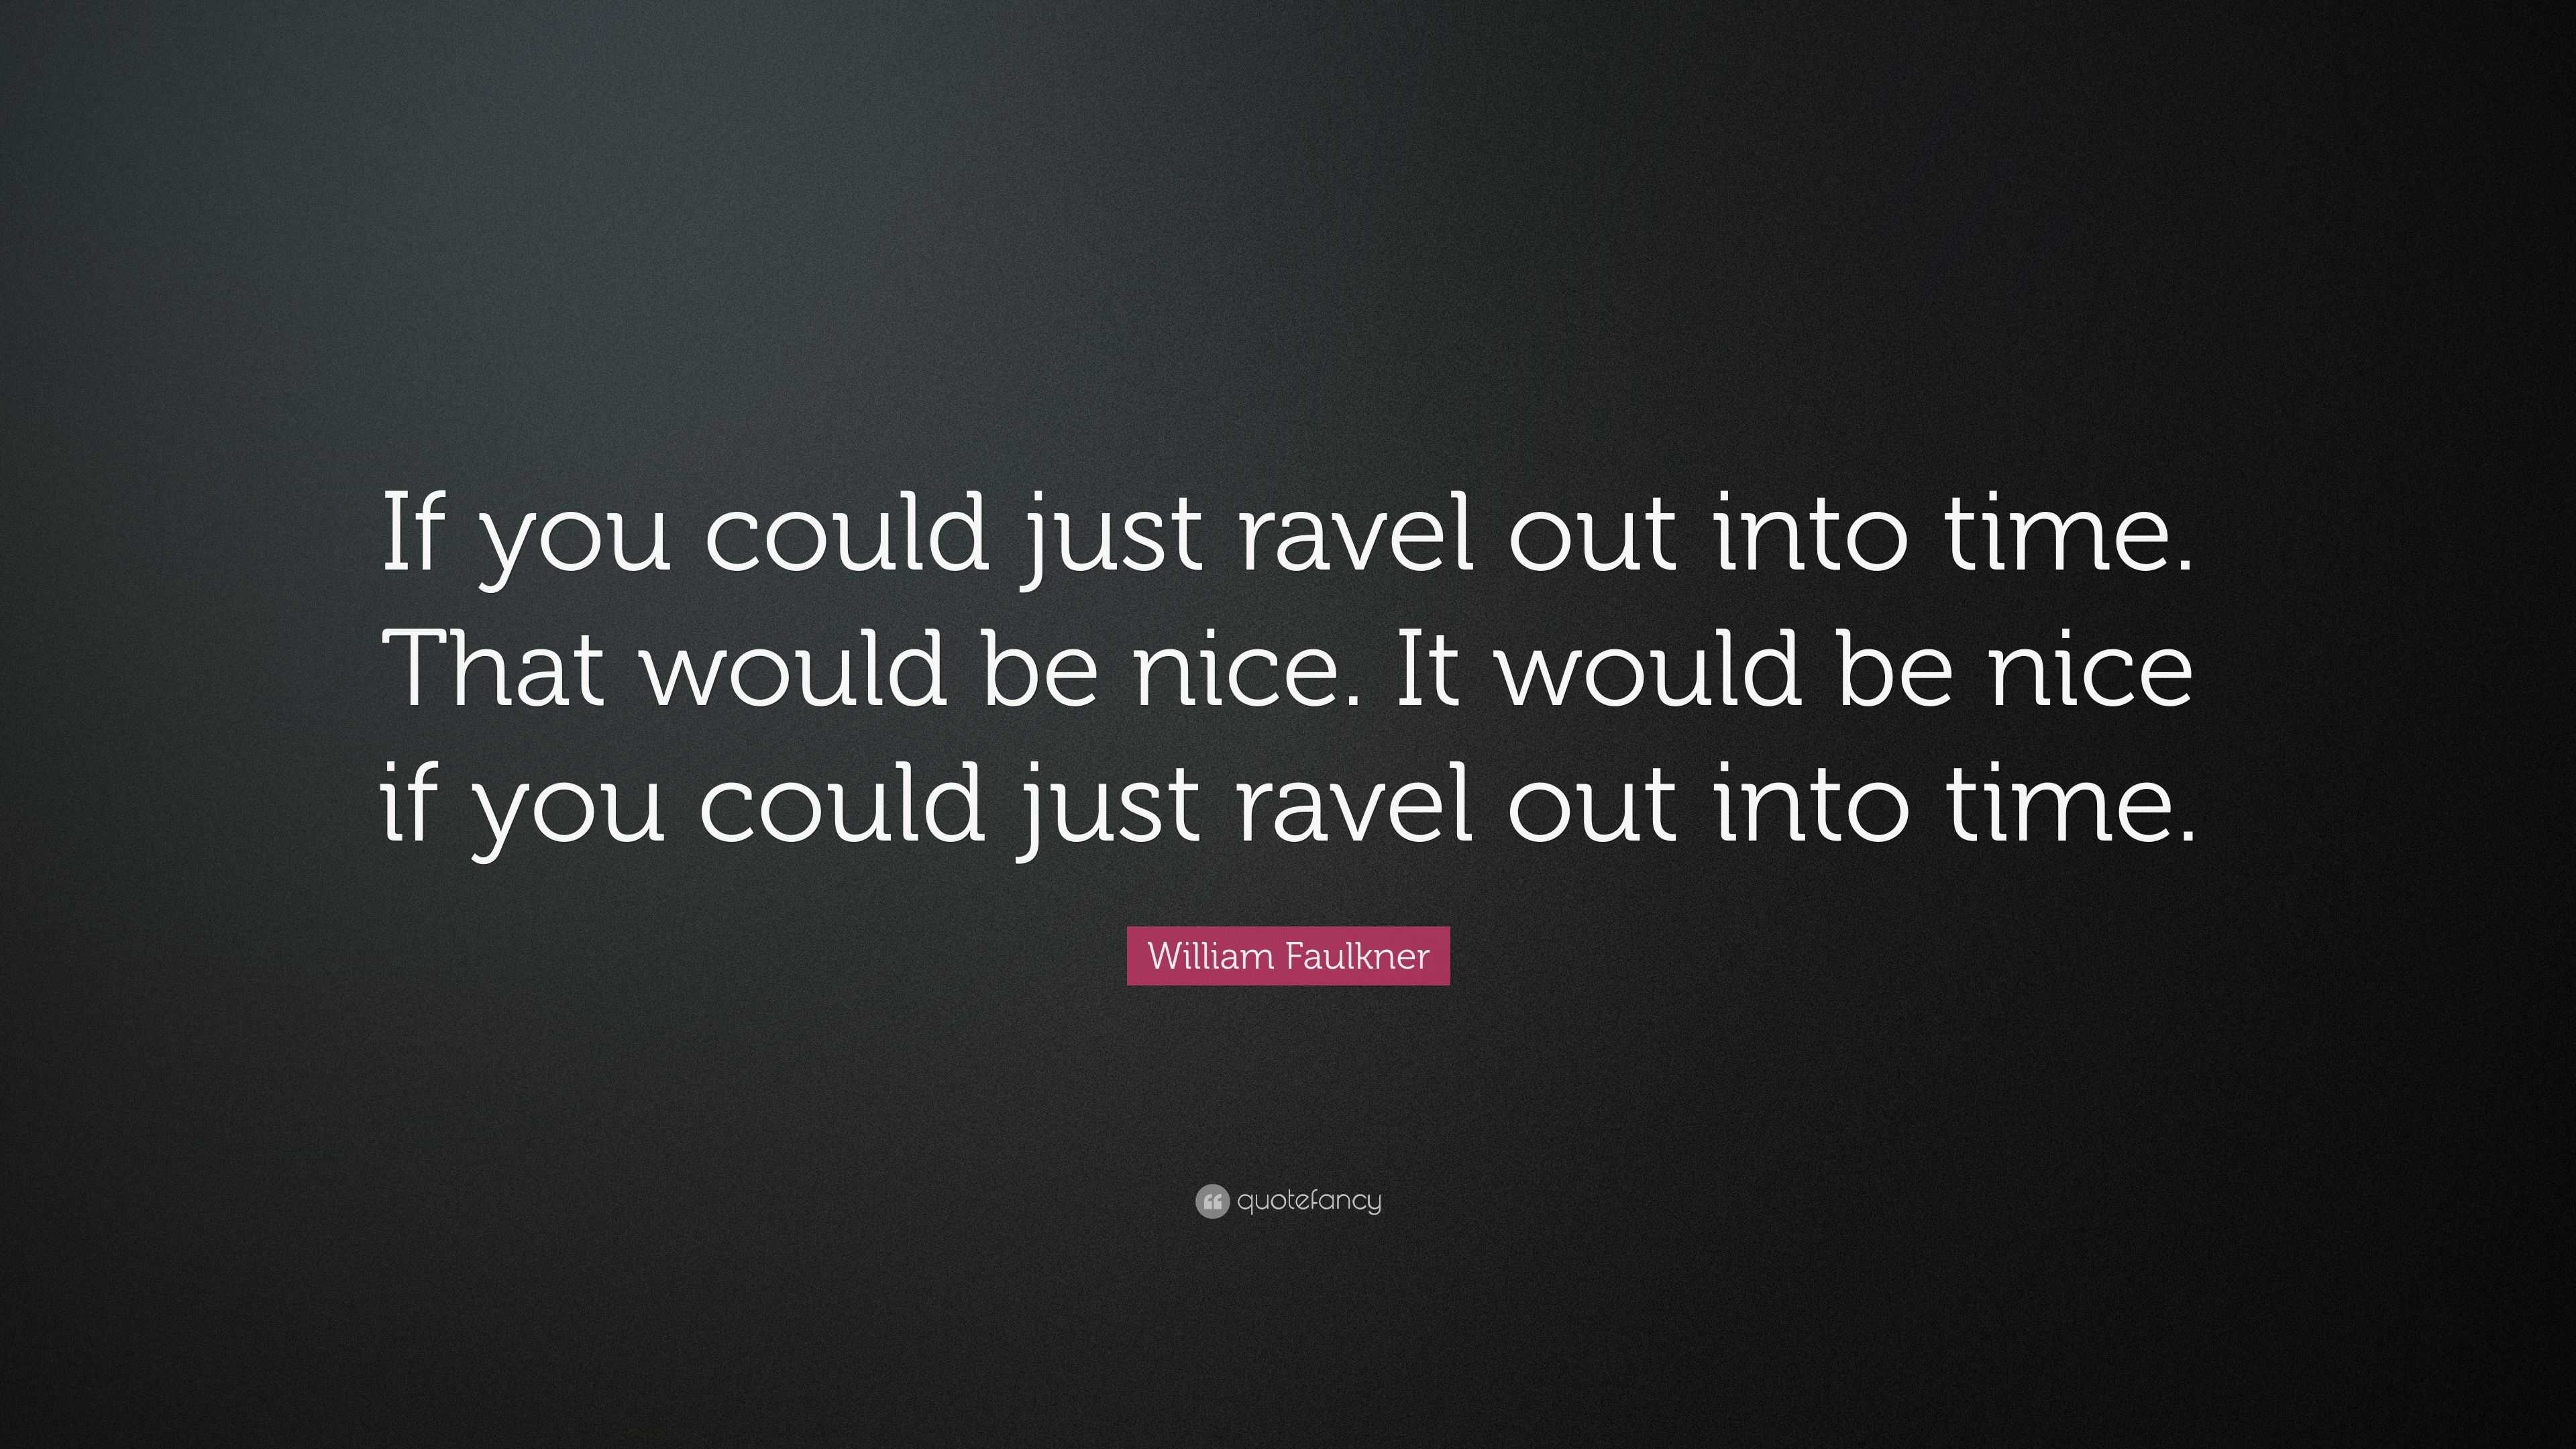 William Faulkner Quote: “If you could just ravel out into time. That ...